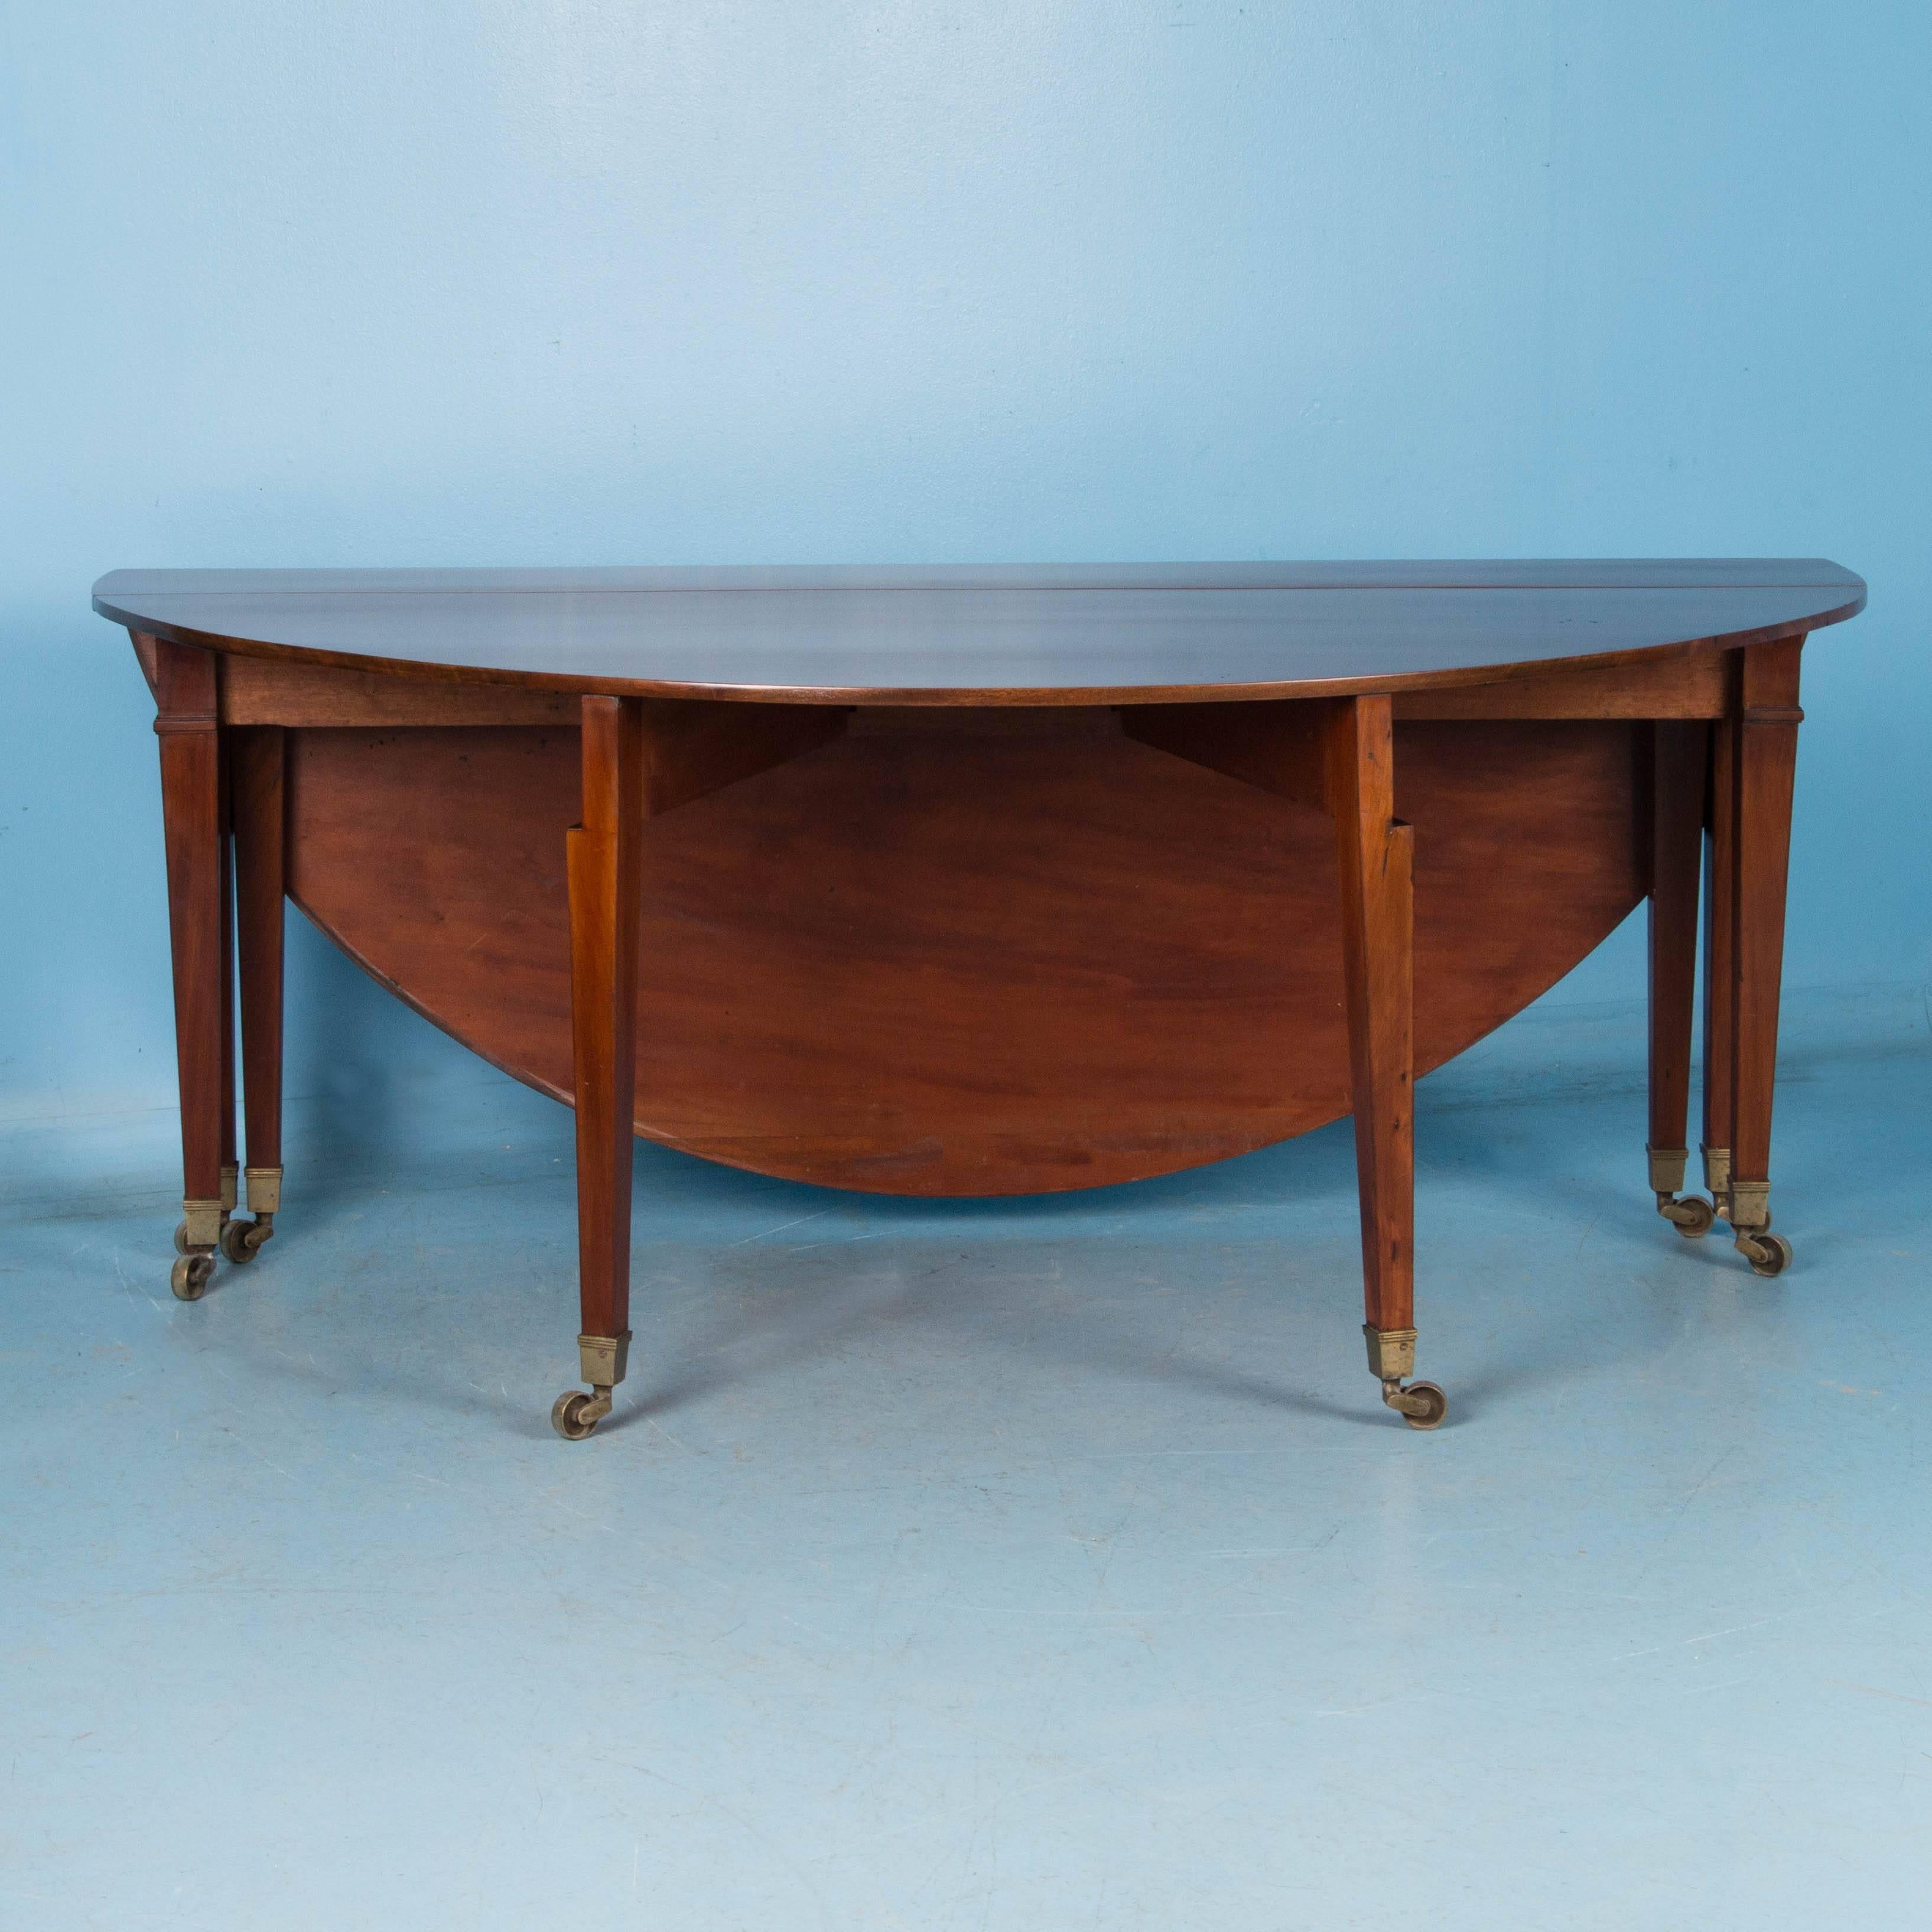 19th Century Large Antique Mahogany Drop Leaf Table, Also Serves as Console Table